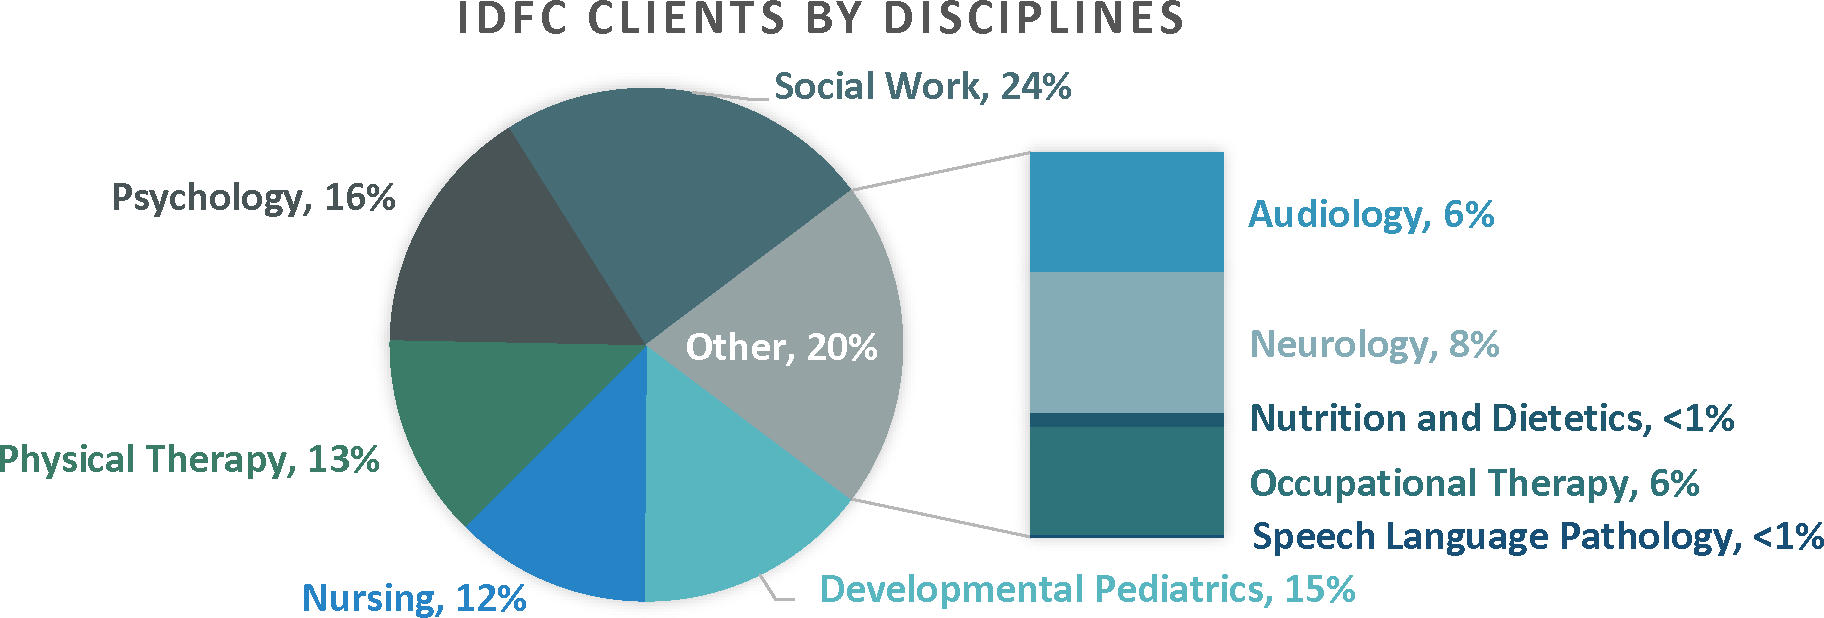 Pie Chart of Infant Development Follow-Up Clinic Clients by Disciplines. Social Work 24%, Psychology 16%, Developmental Pediatrics 15%, Physical Therapy 13%, Nursing 12%.